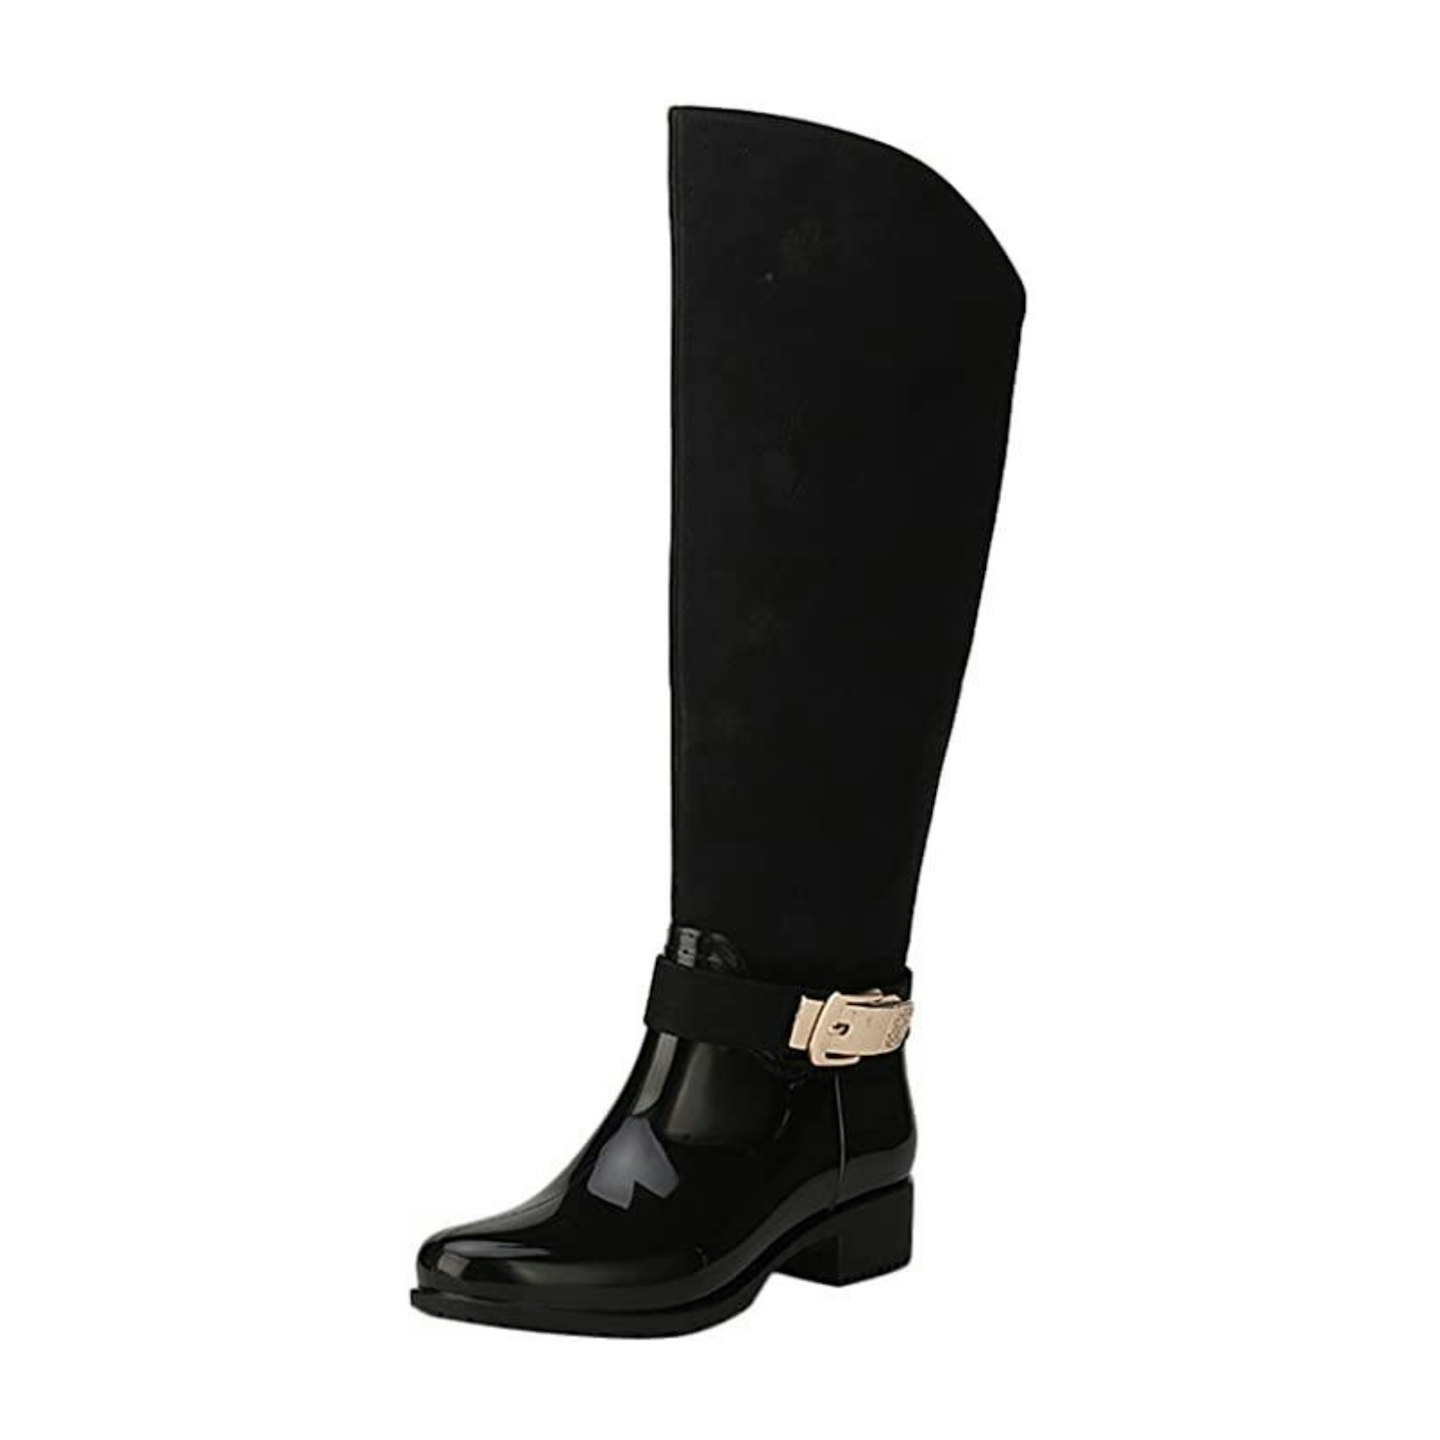 Alexis Leroy Ladies Quilted Knee High Rain Boots